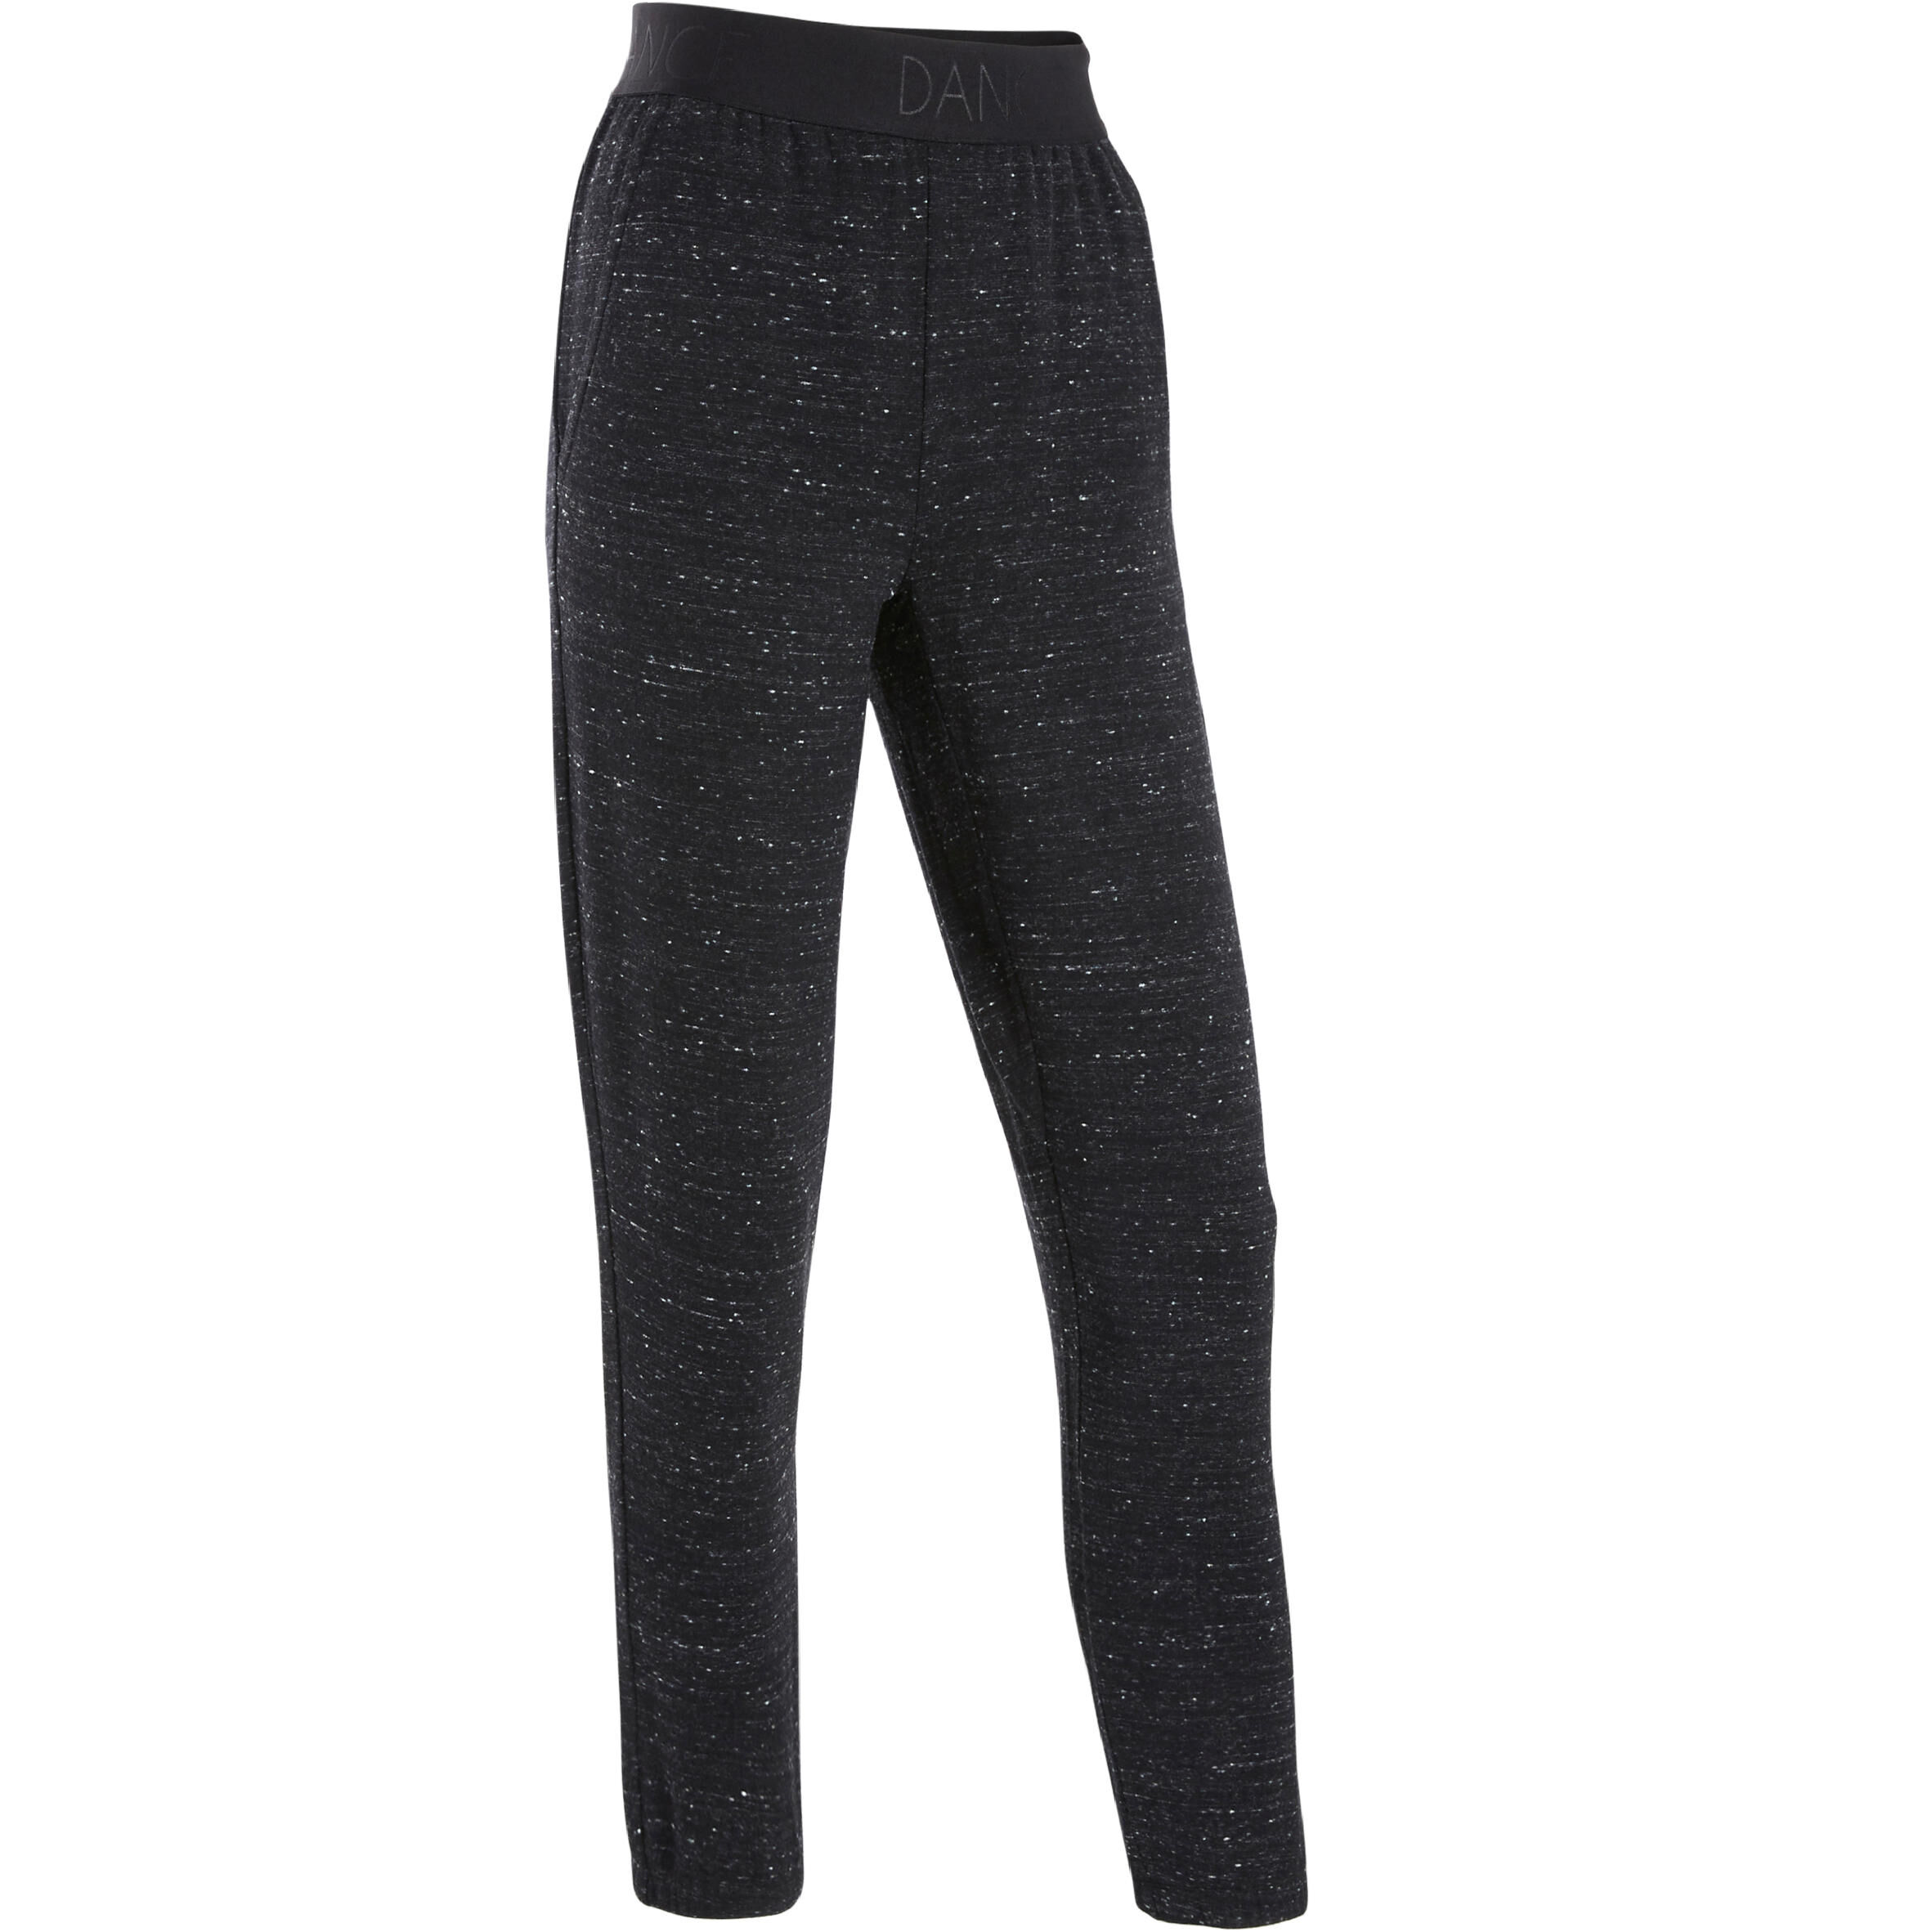 Women's Joggers & Tracksuits Bottoms